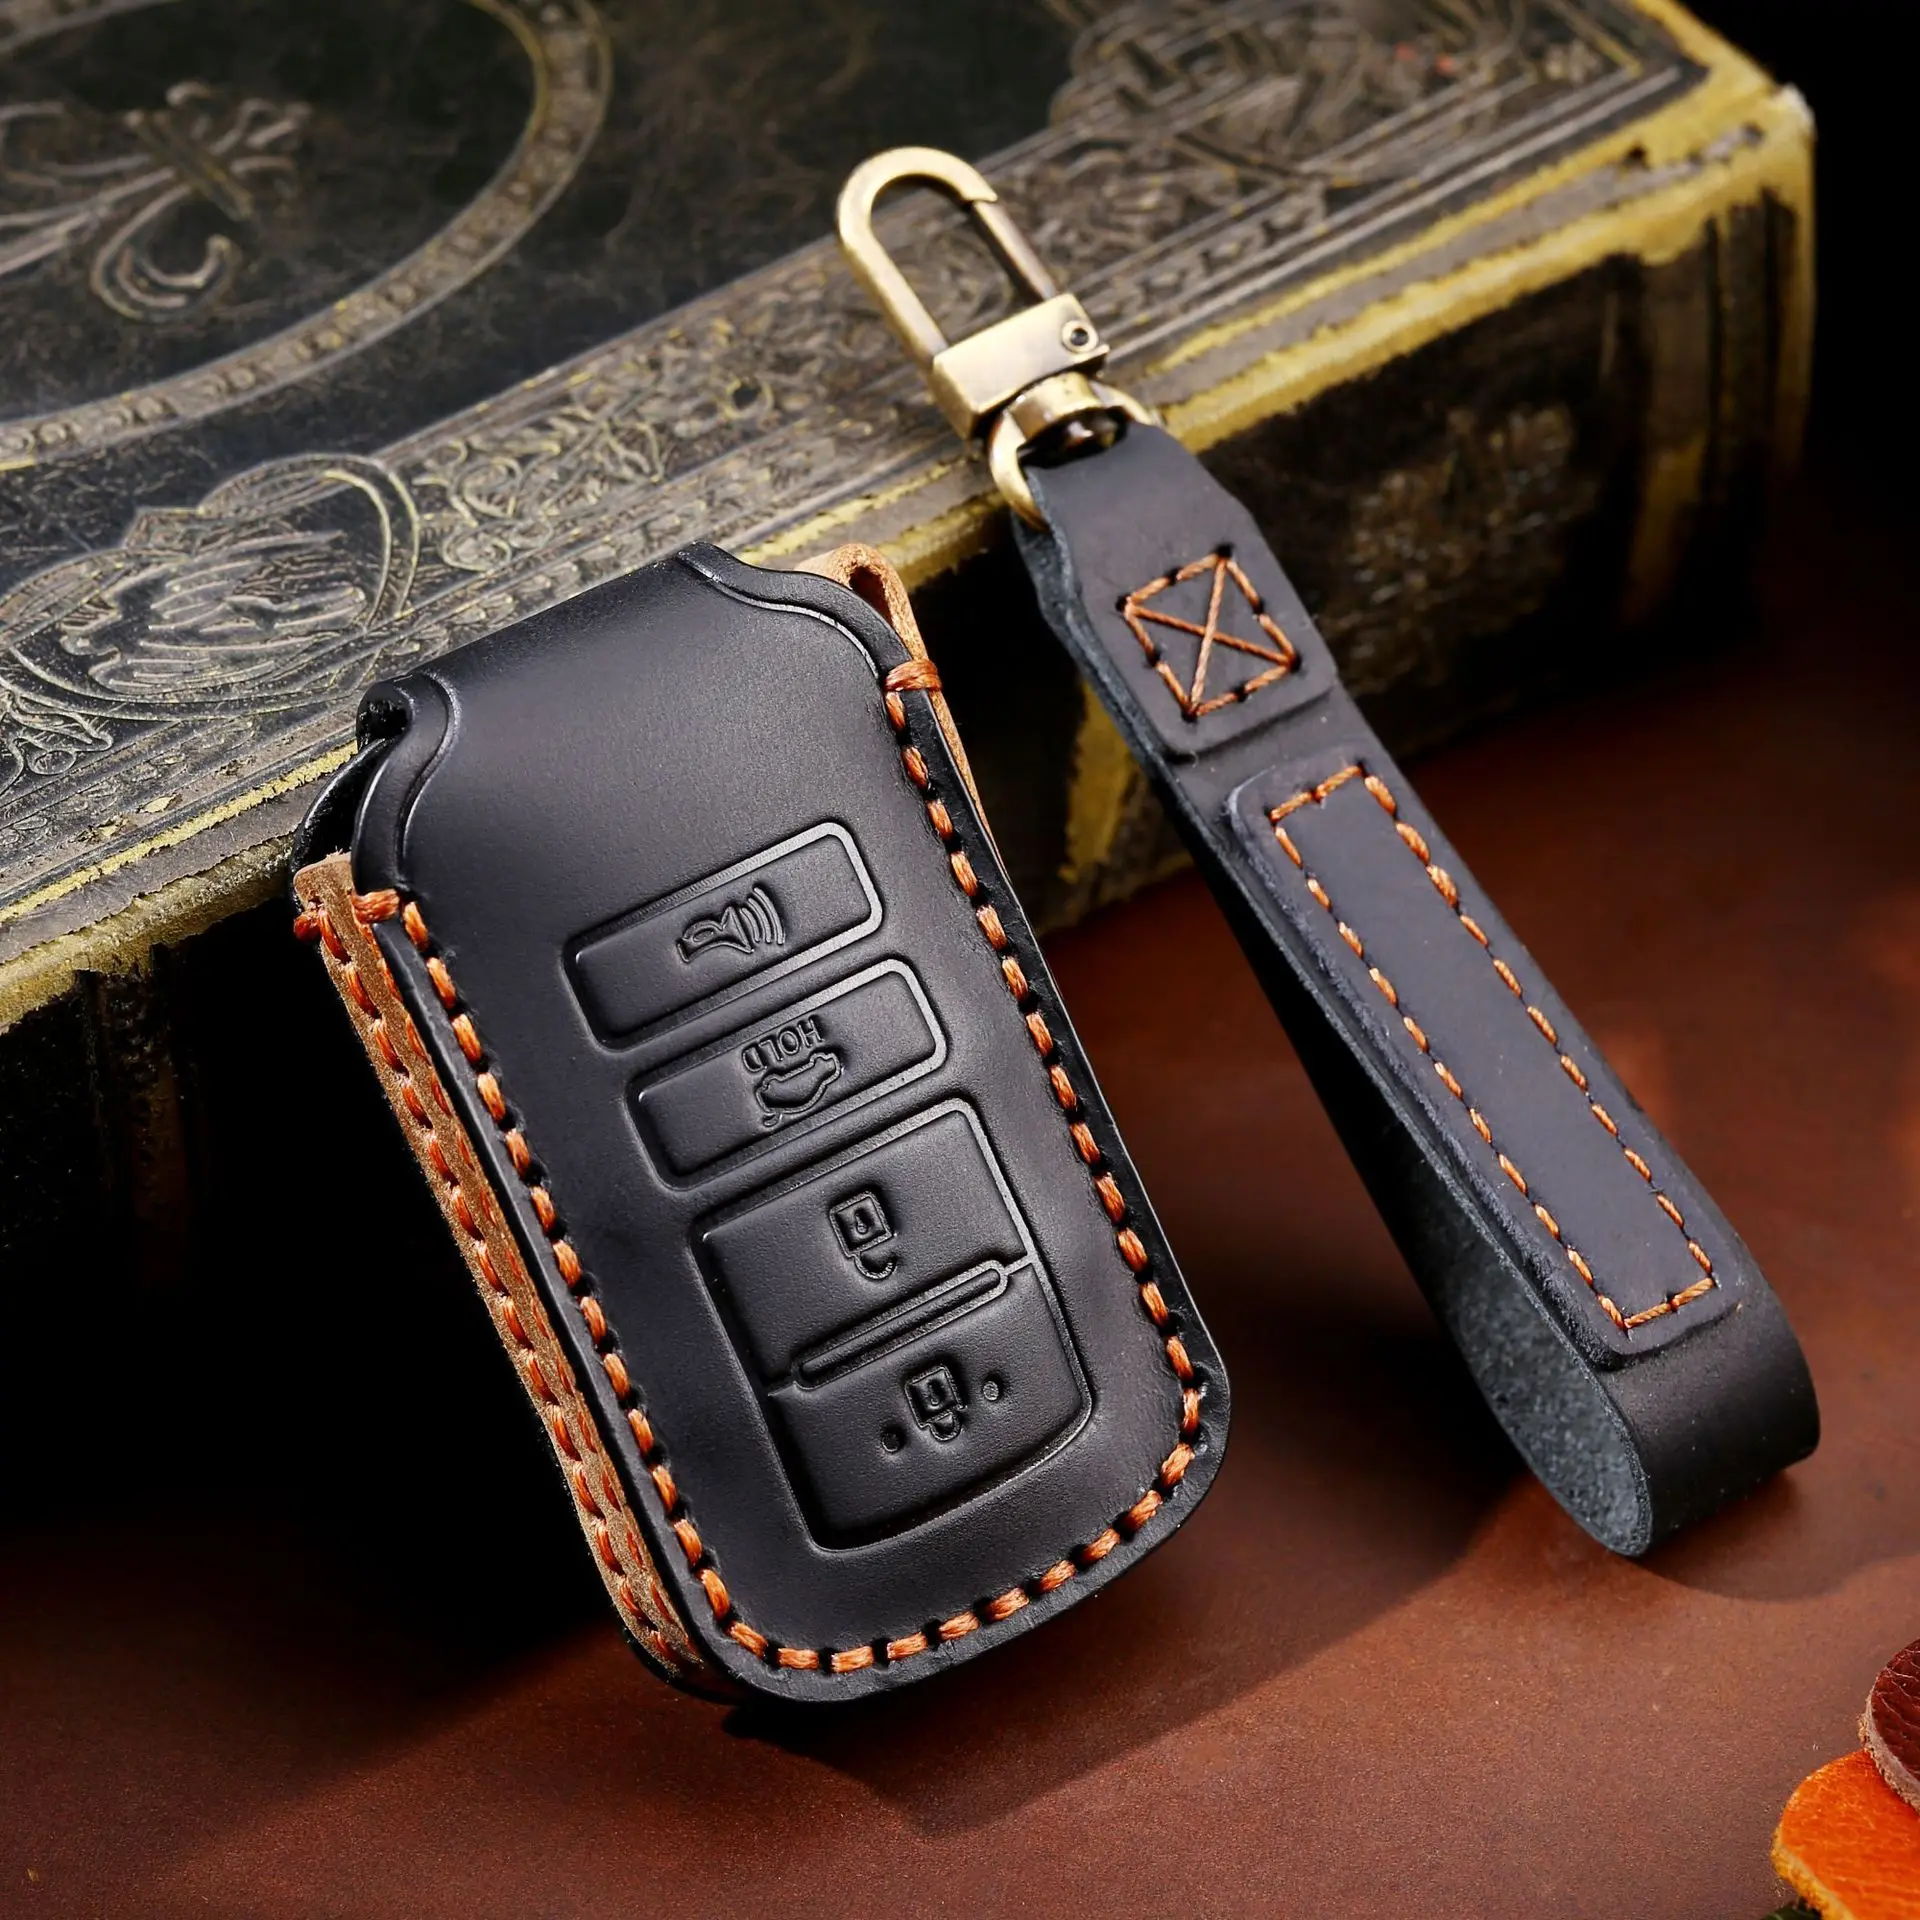 

Luxury Leather Car Key Case Cover Fob Protect for Kia 4 Button Sorento K900 K7 Cadenza Accessories Keychain Holder Shell Bag